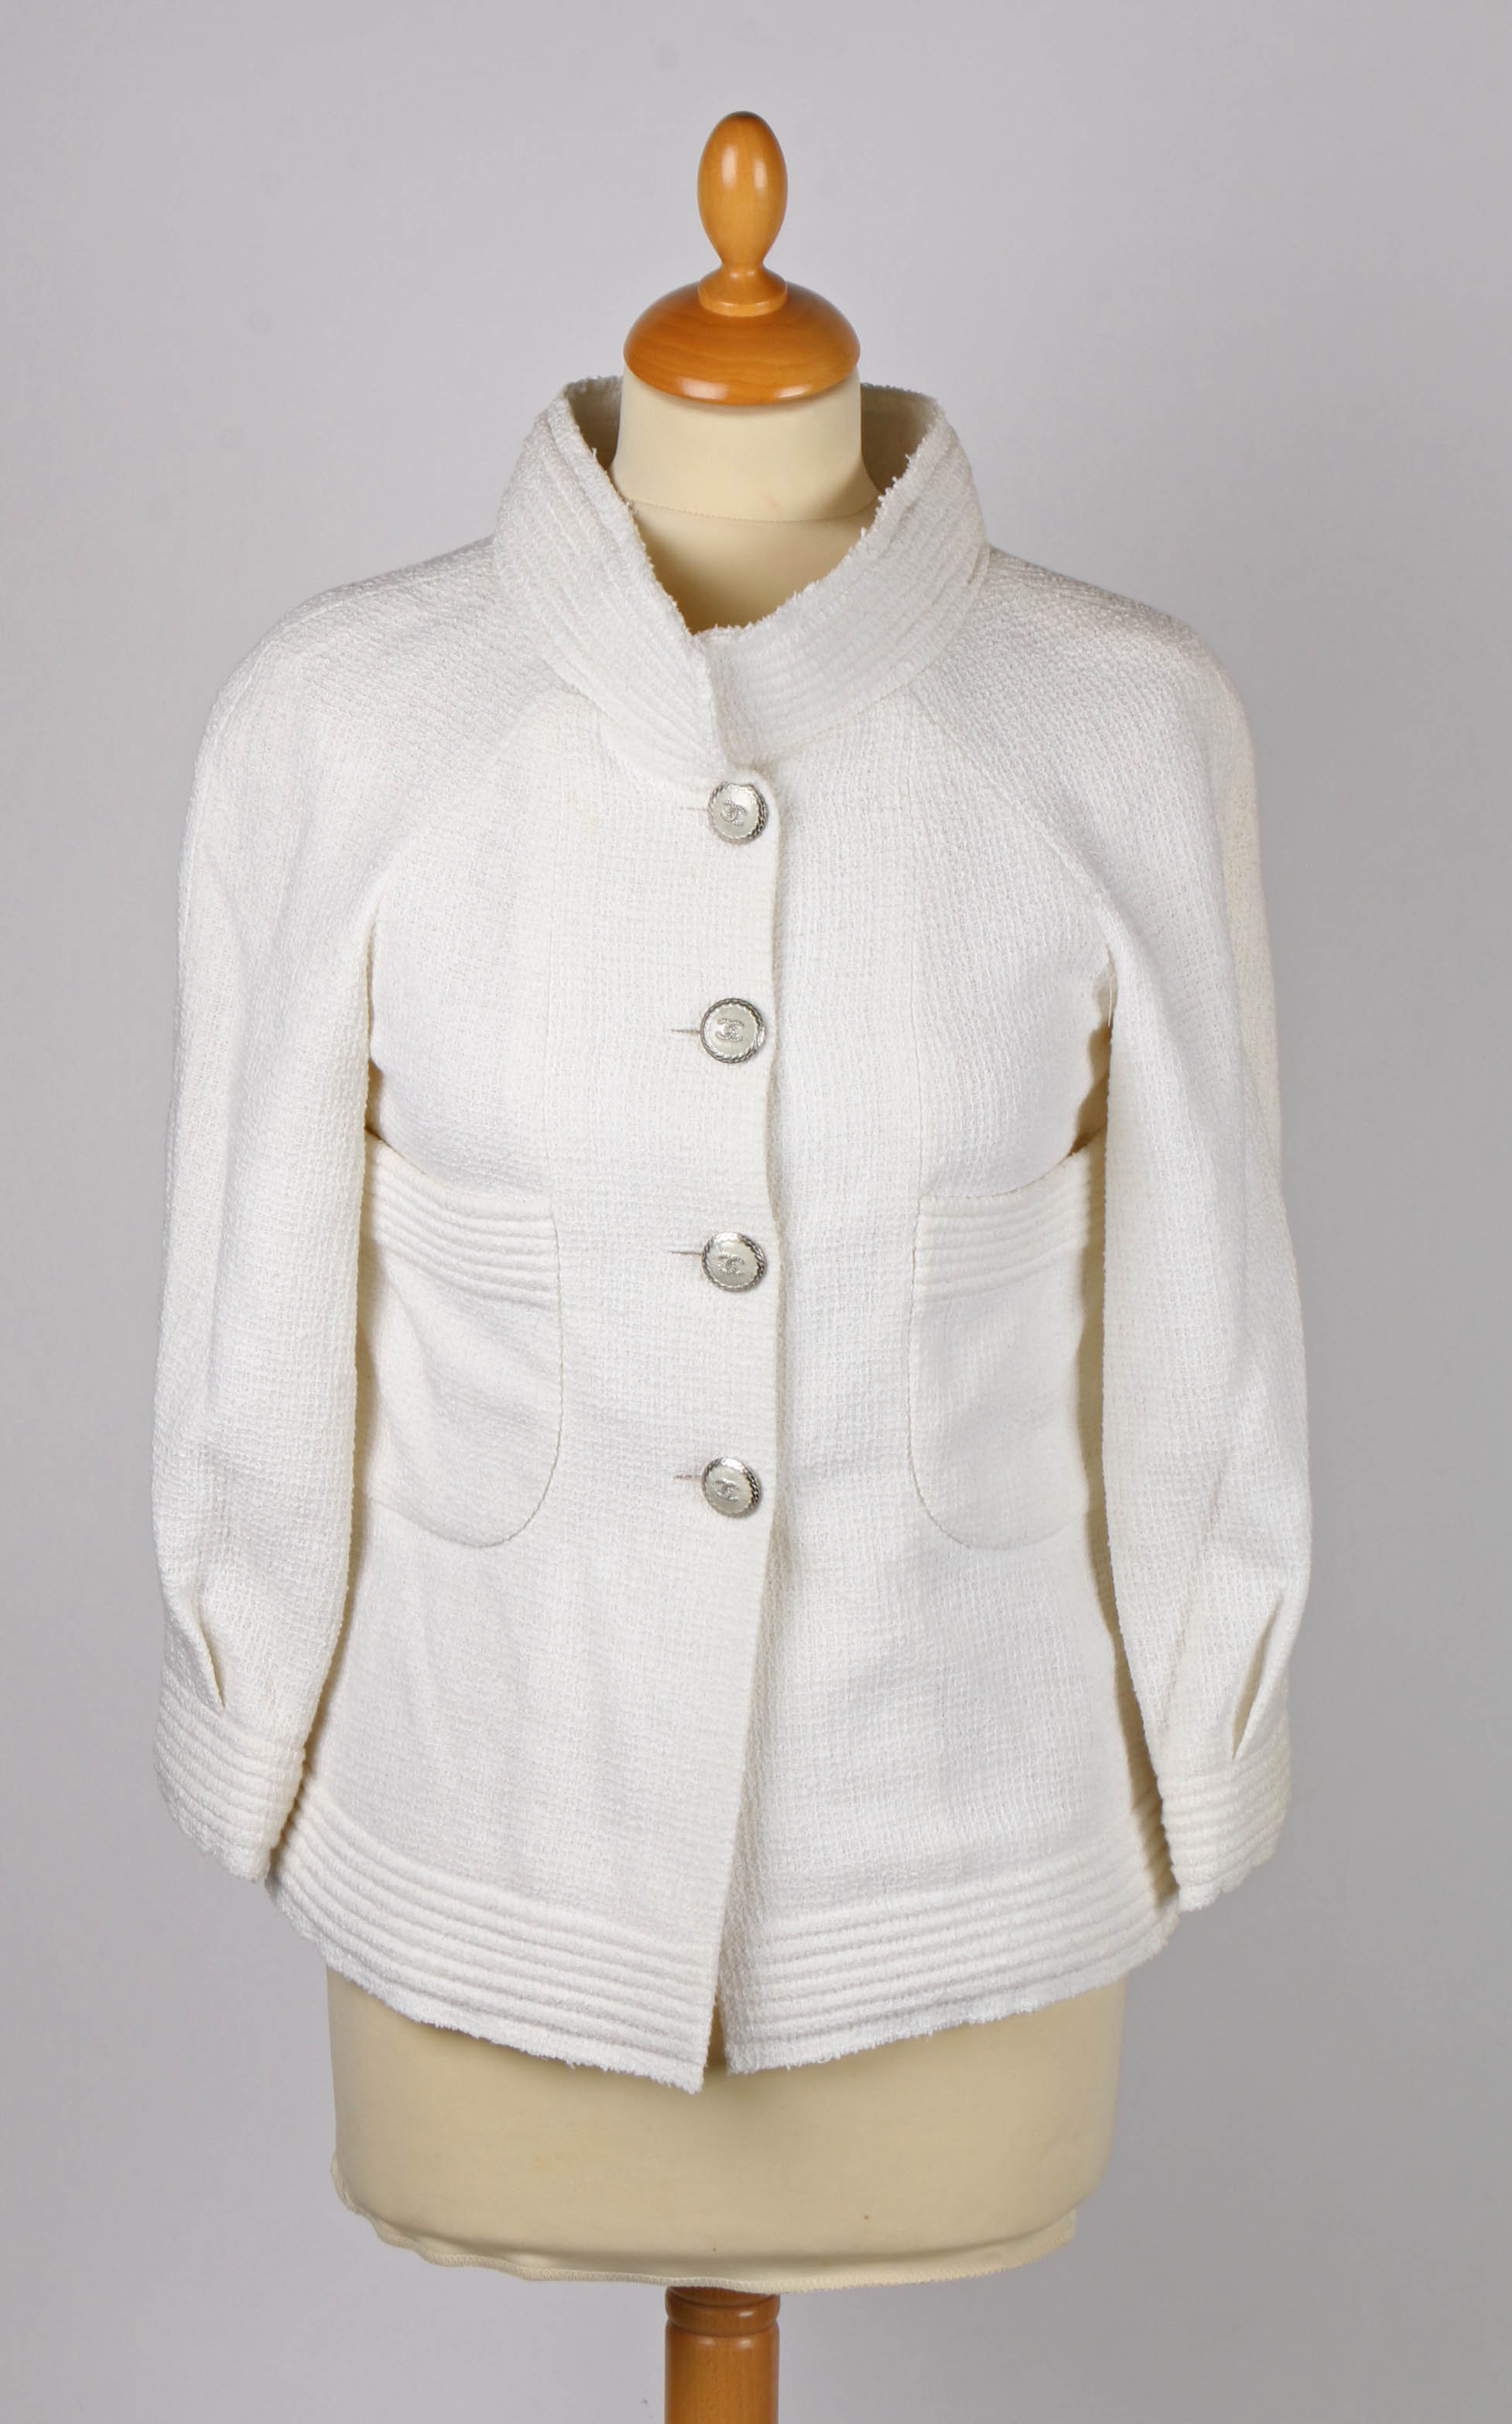 A Chanel white tweed single breasted jacket with pearlescent CC logo buttons. Size 34.